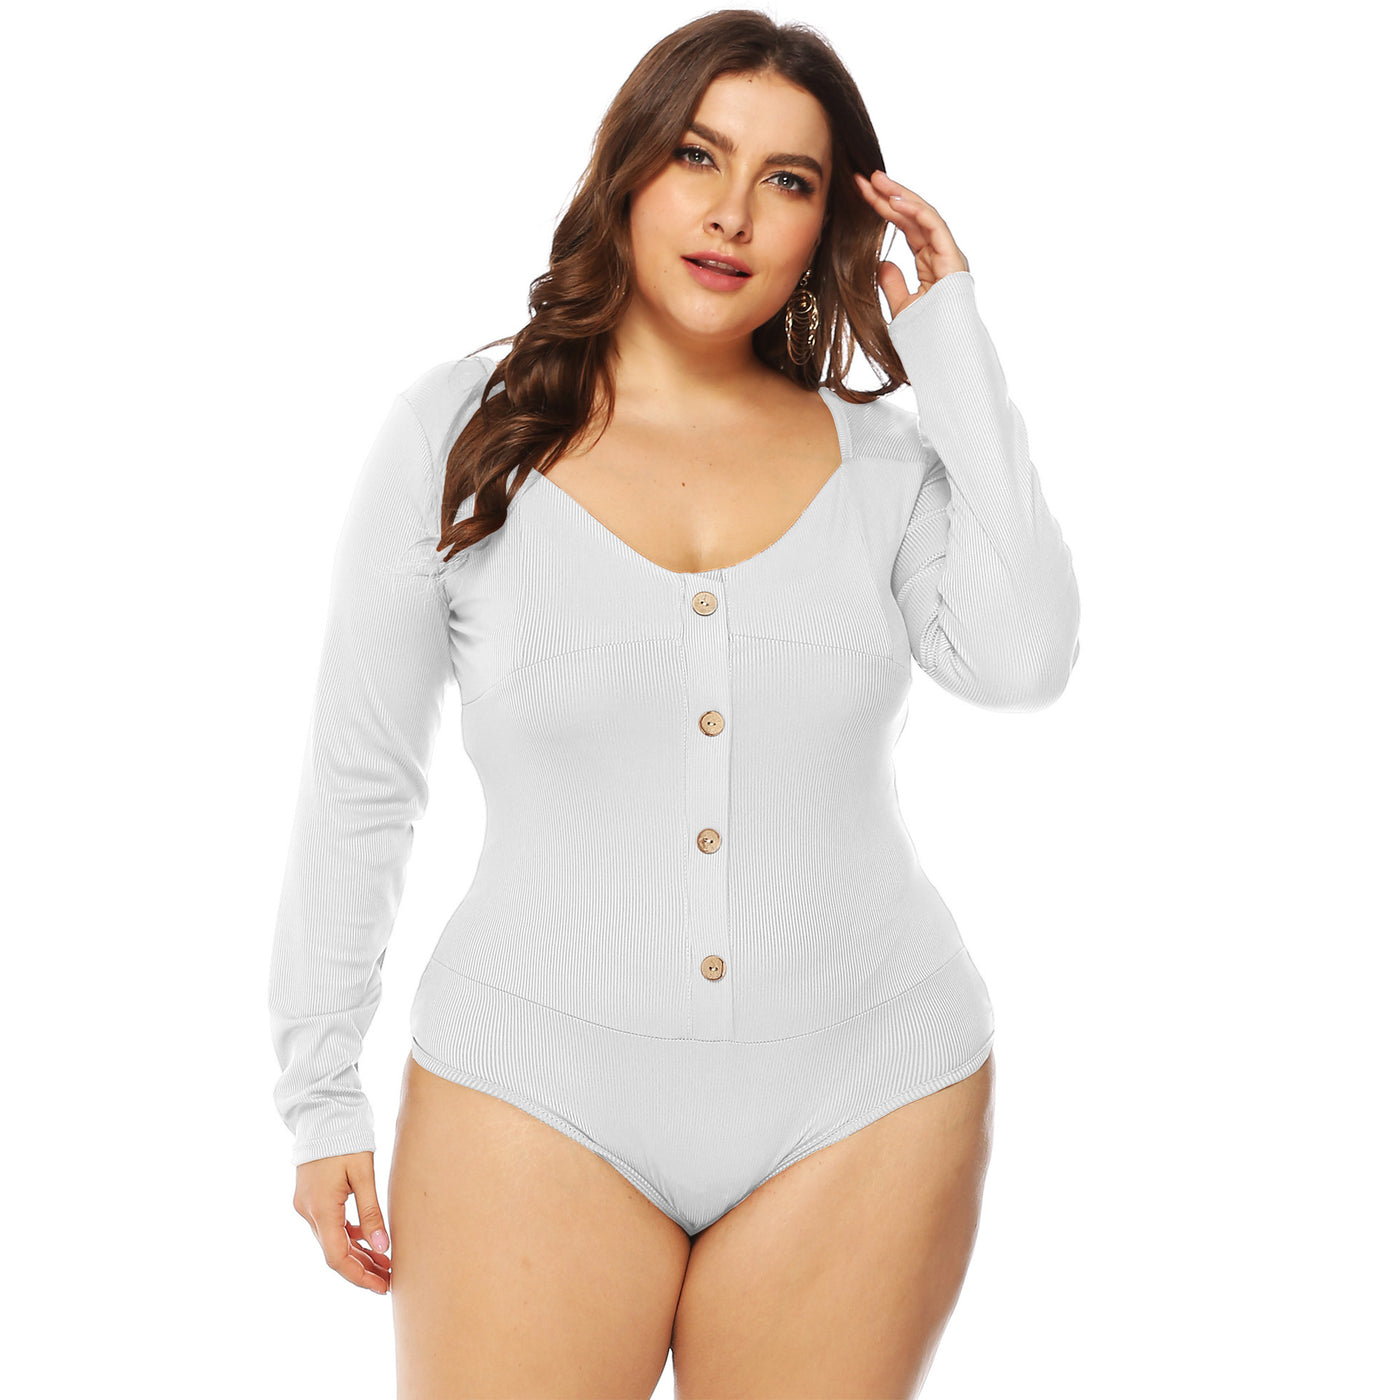 Plus Size Women Long Sleeve Deep U Backless Button Jumpsuit Deep V Plunge Plunge Casual All-Match Bottoming Shirt